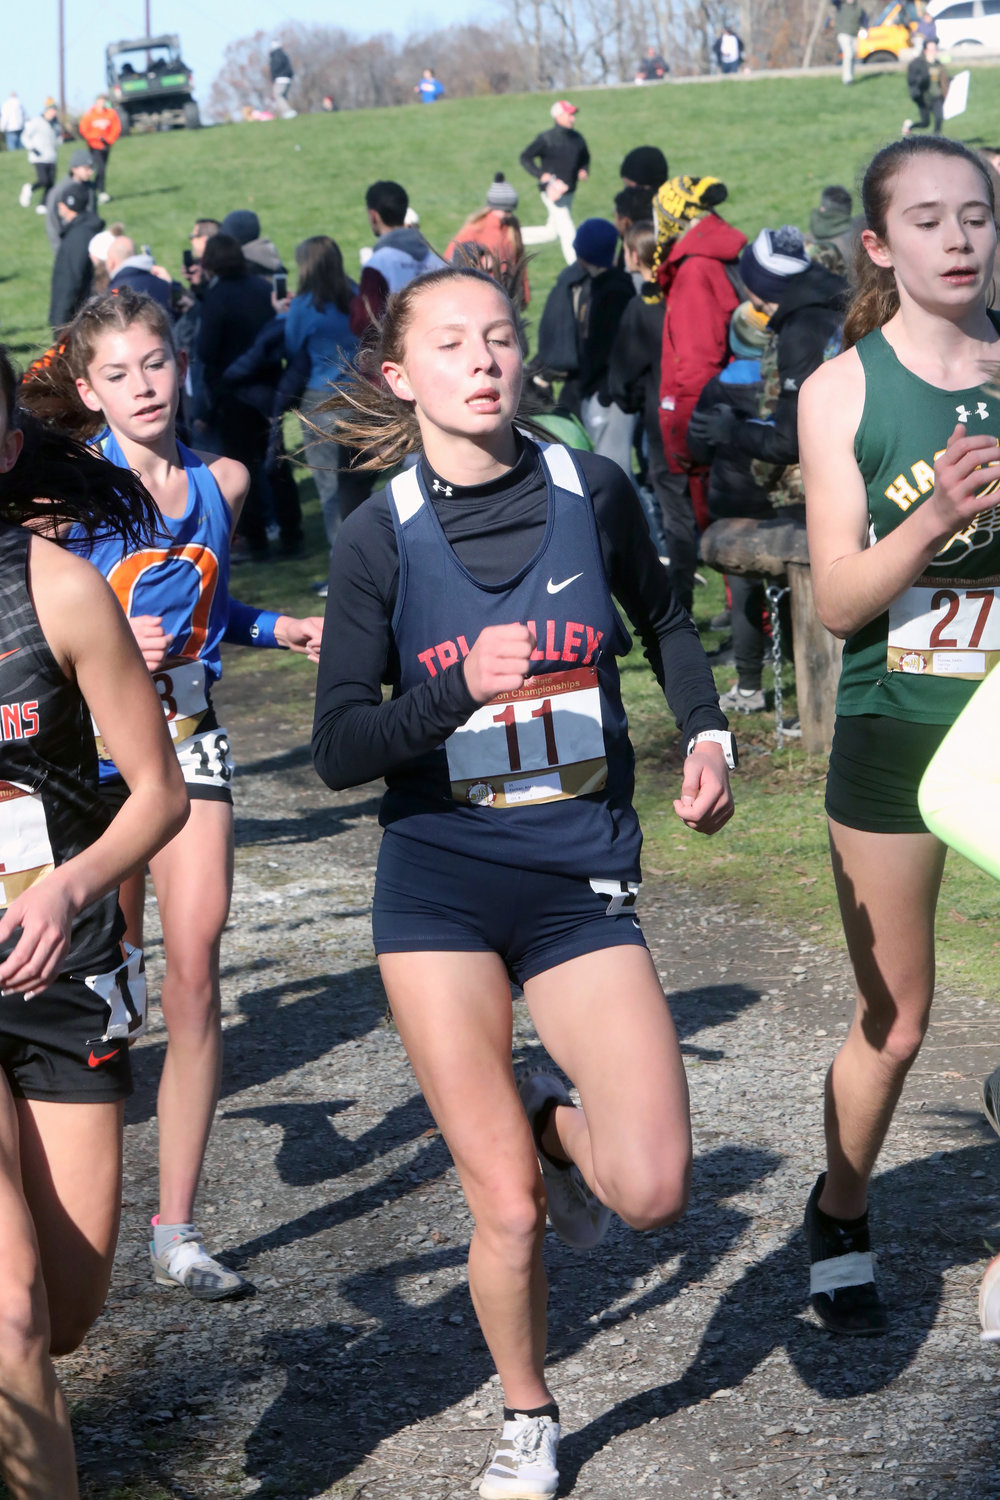 T-V eighth grader Anna Furman runs intensely with a half-mile to go in the Federation Championship. She finished 32nd out of 276 runners and earned a medal for her performance.